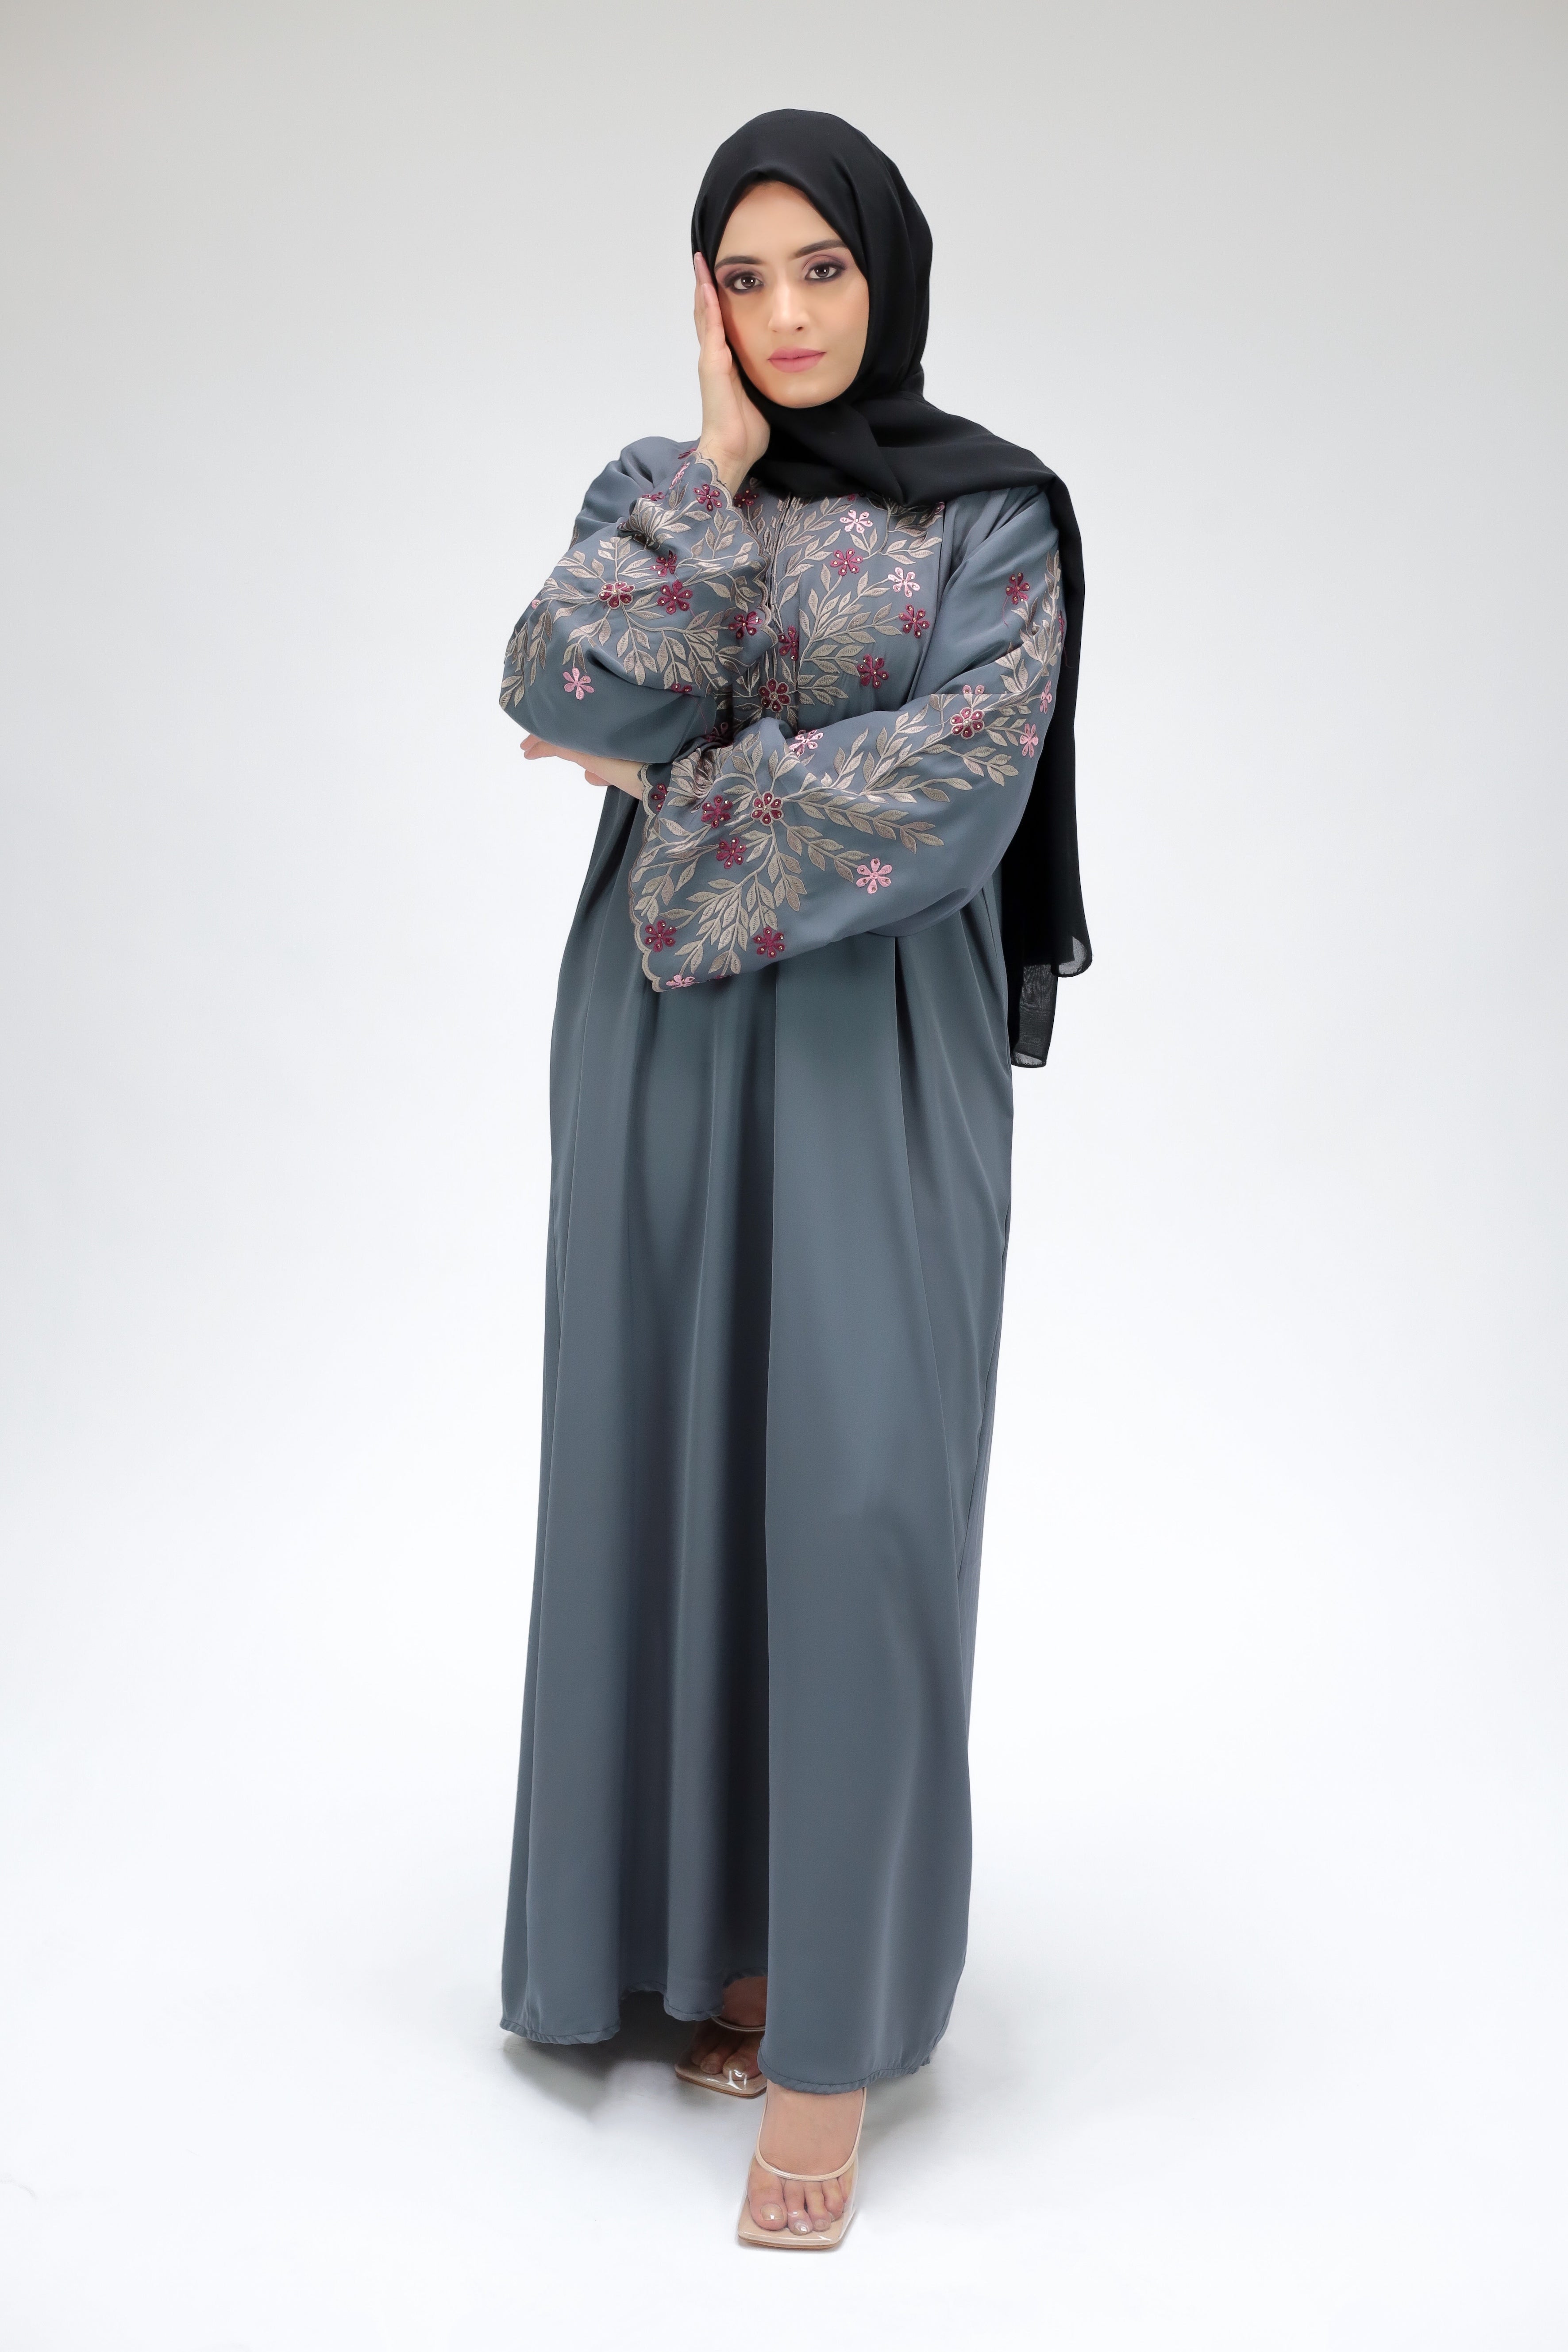 Volcanic Ash Grey Abaya With Exquisite Floral Embroidery